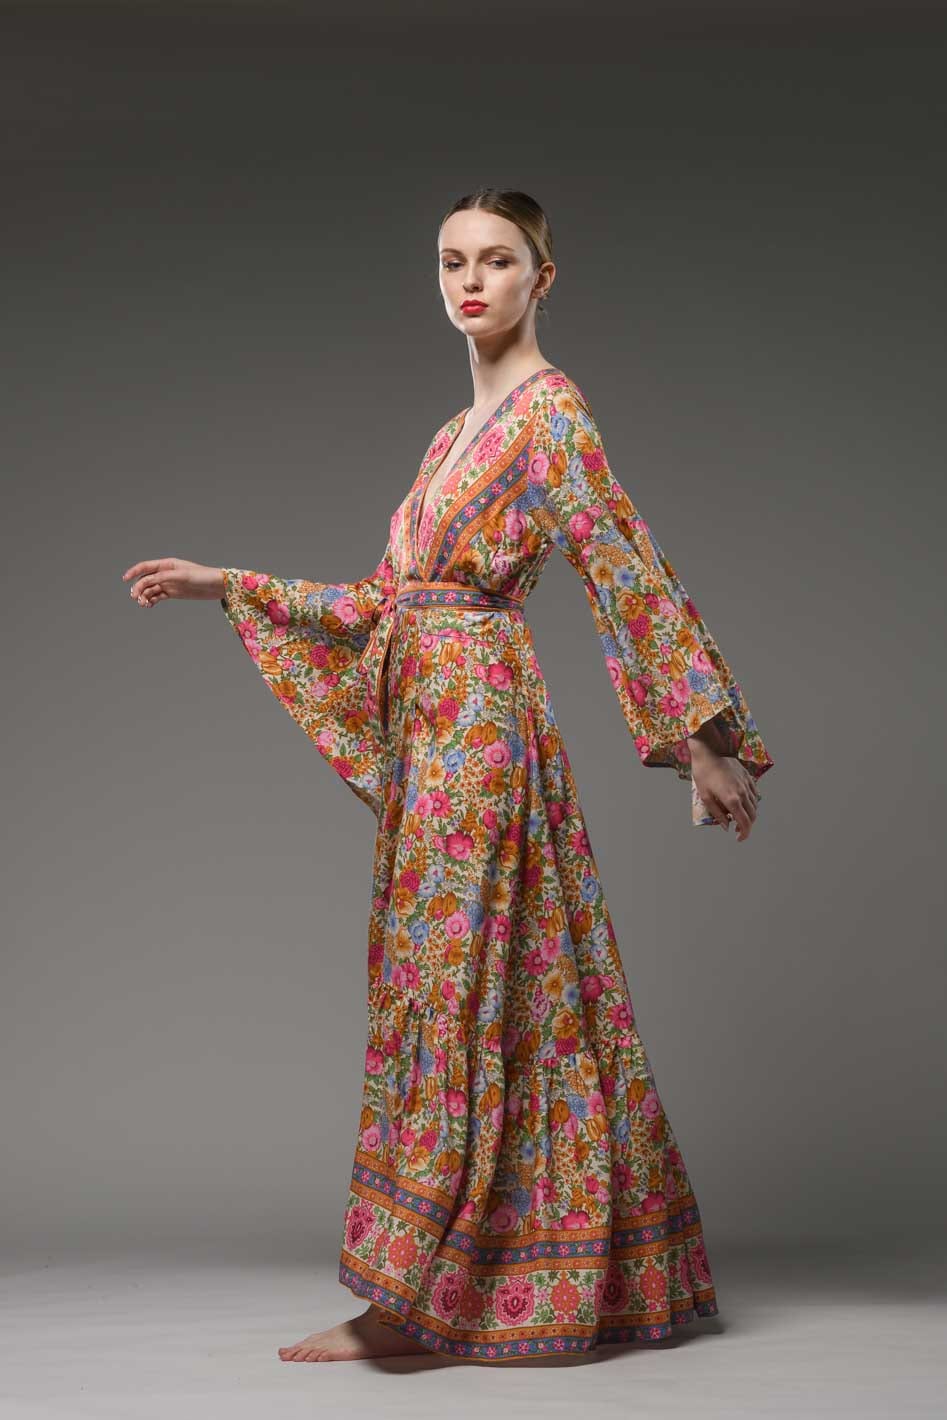 Bohemian style pink floral border printed V neck ruffled self tie waist bell sleeve maxi wrap dress